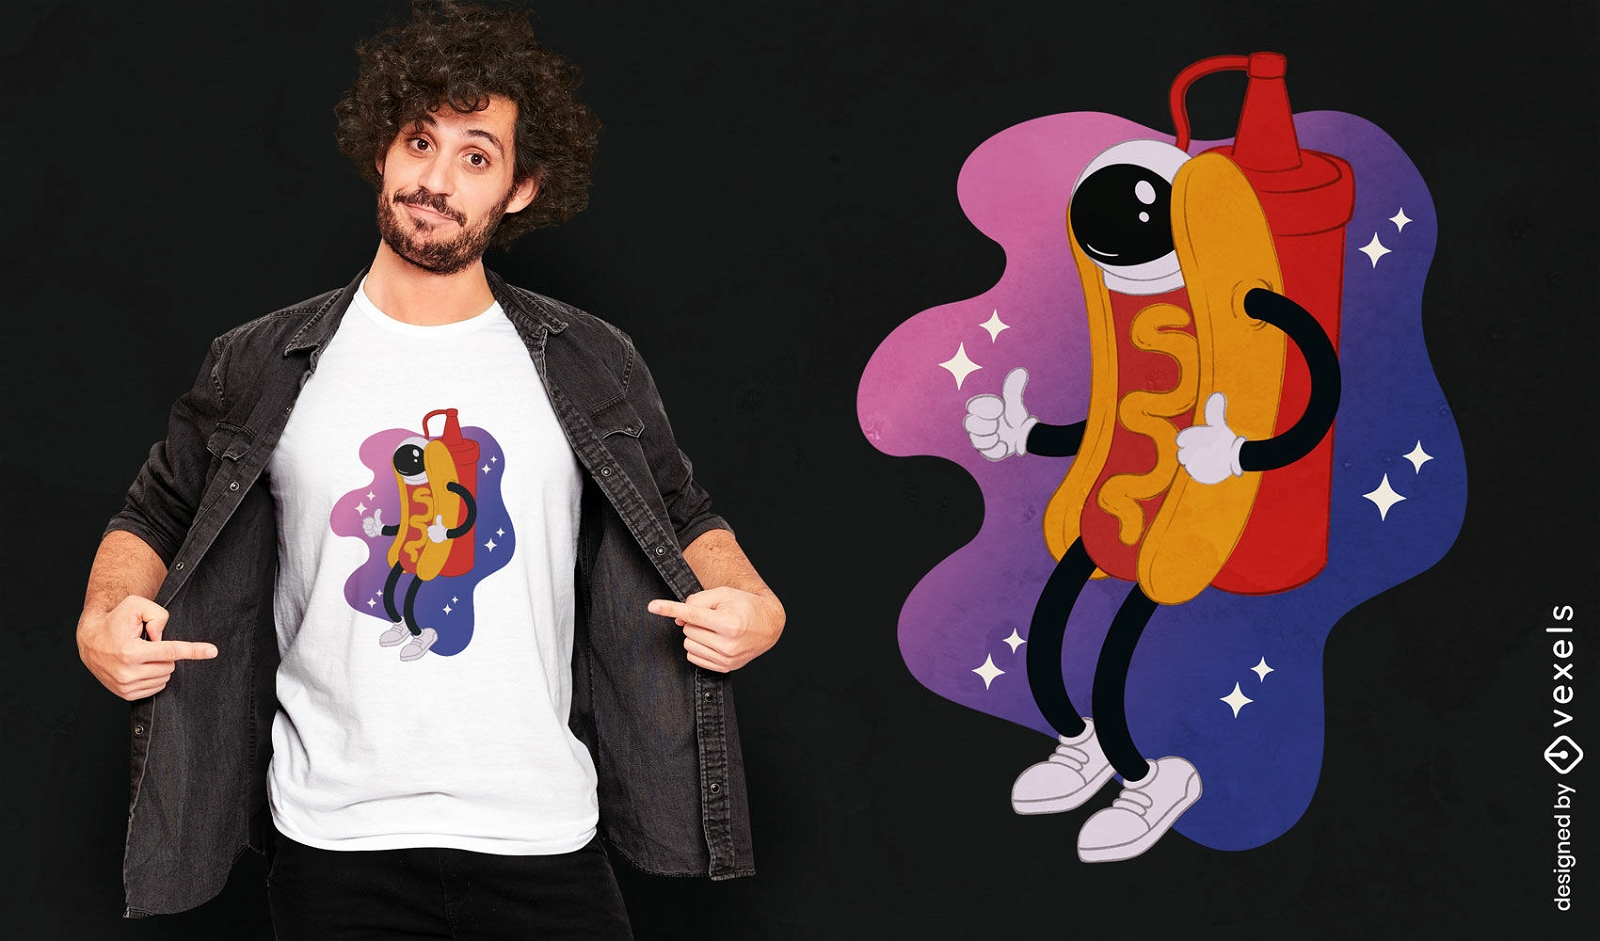 Hot dog astronaut in space t-shirt design